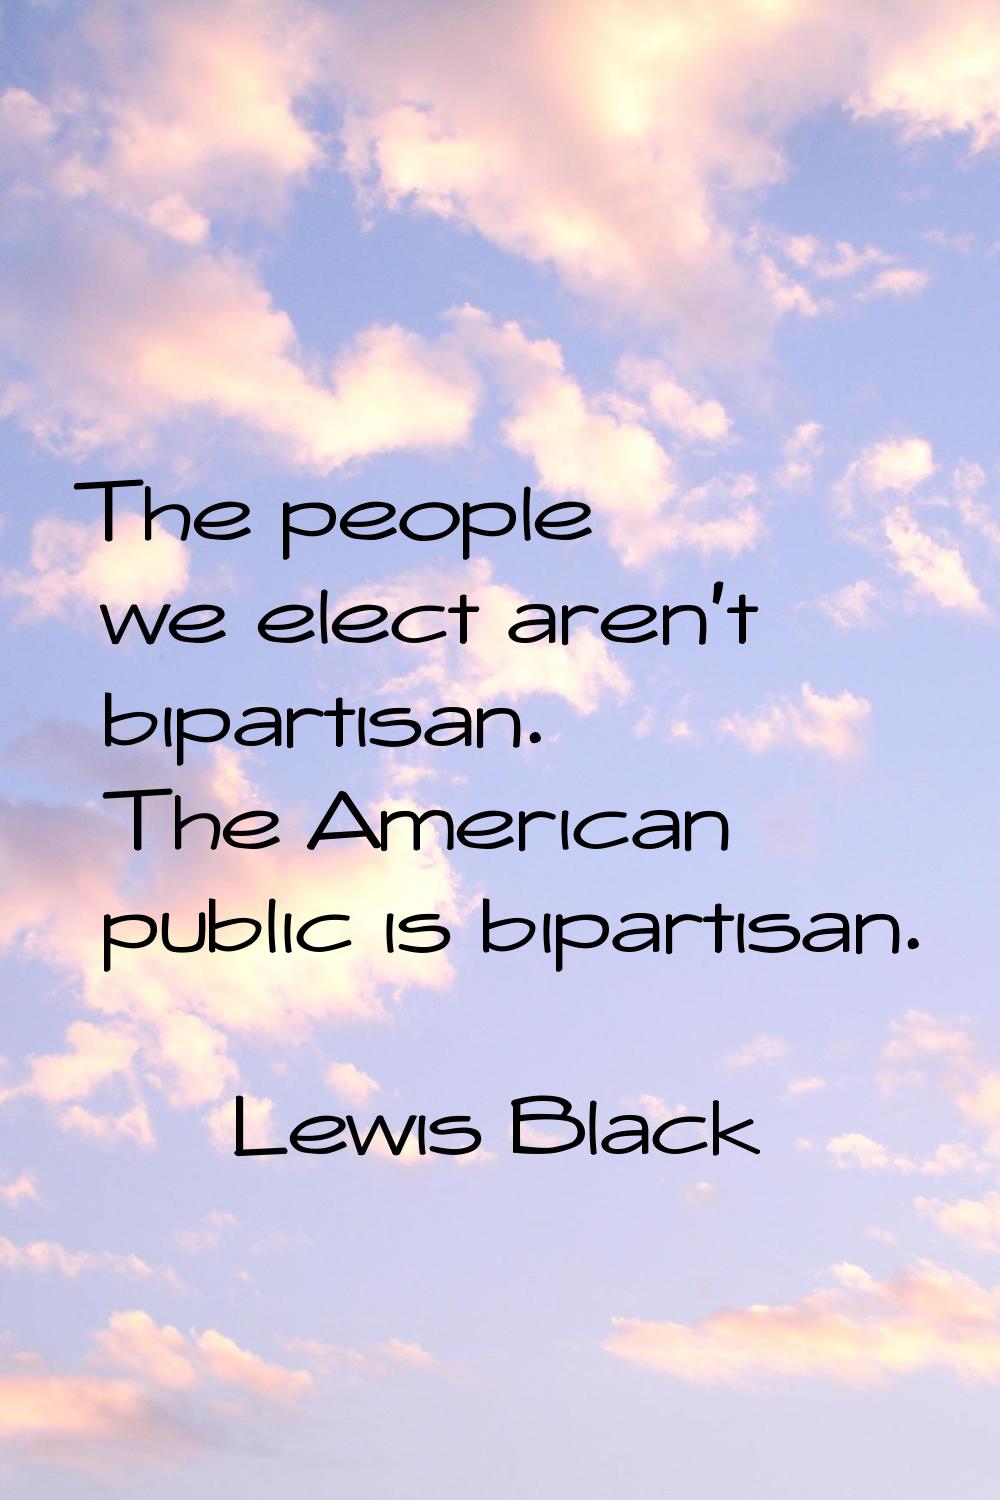 The people we elect aren't bipartisan. The American public is bipartisan.